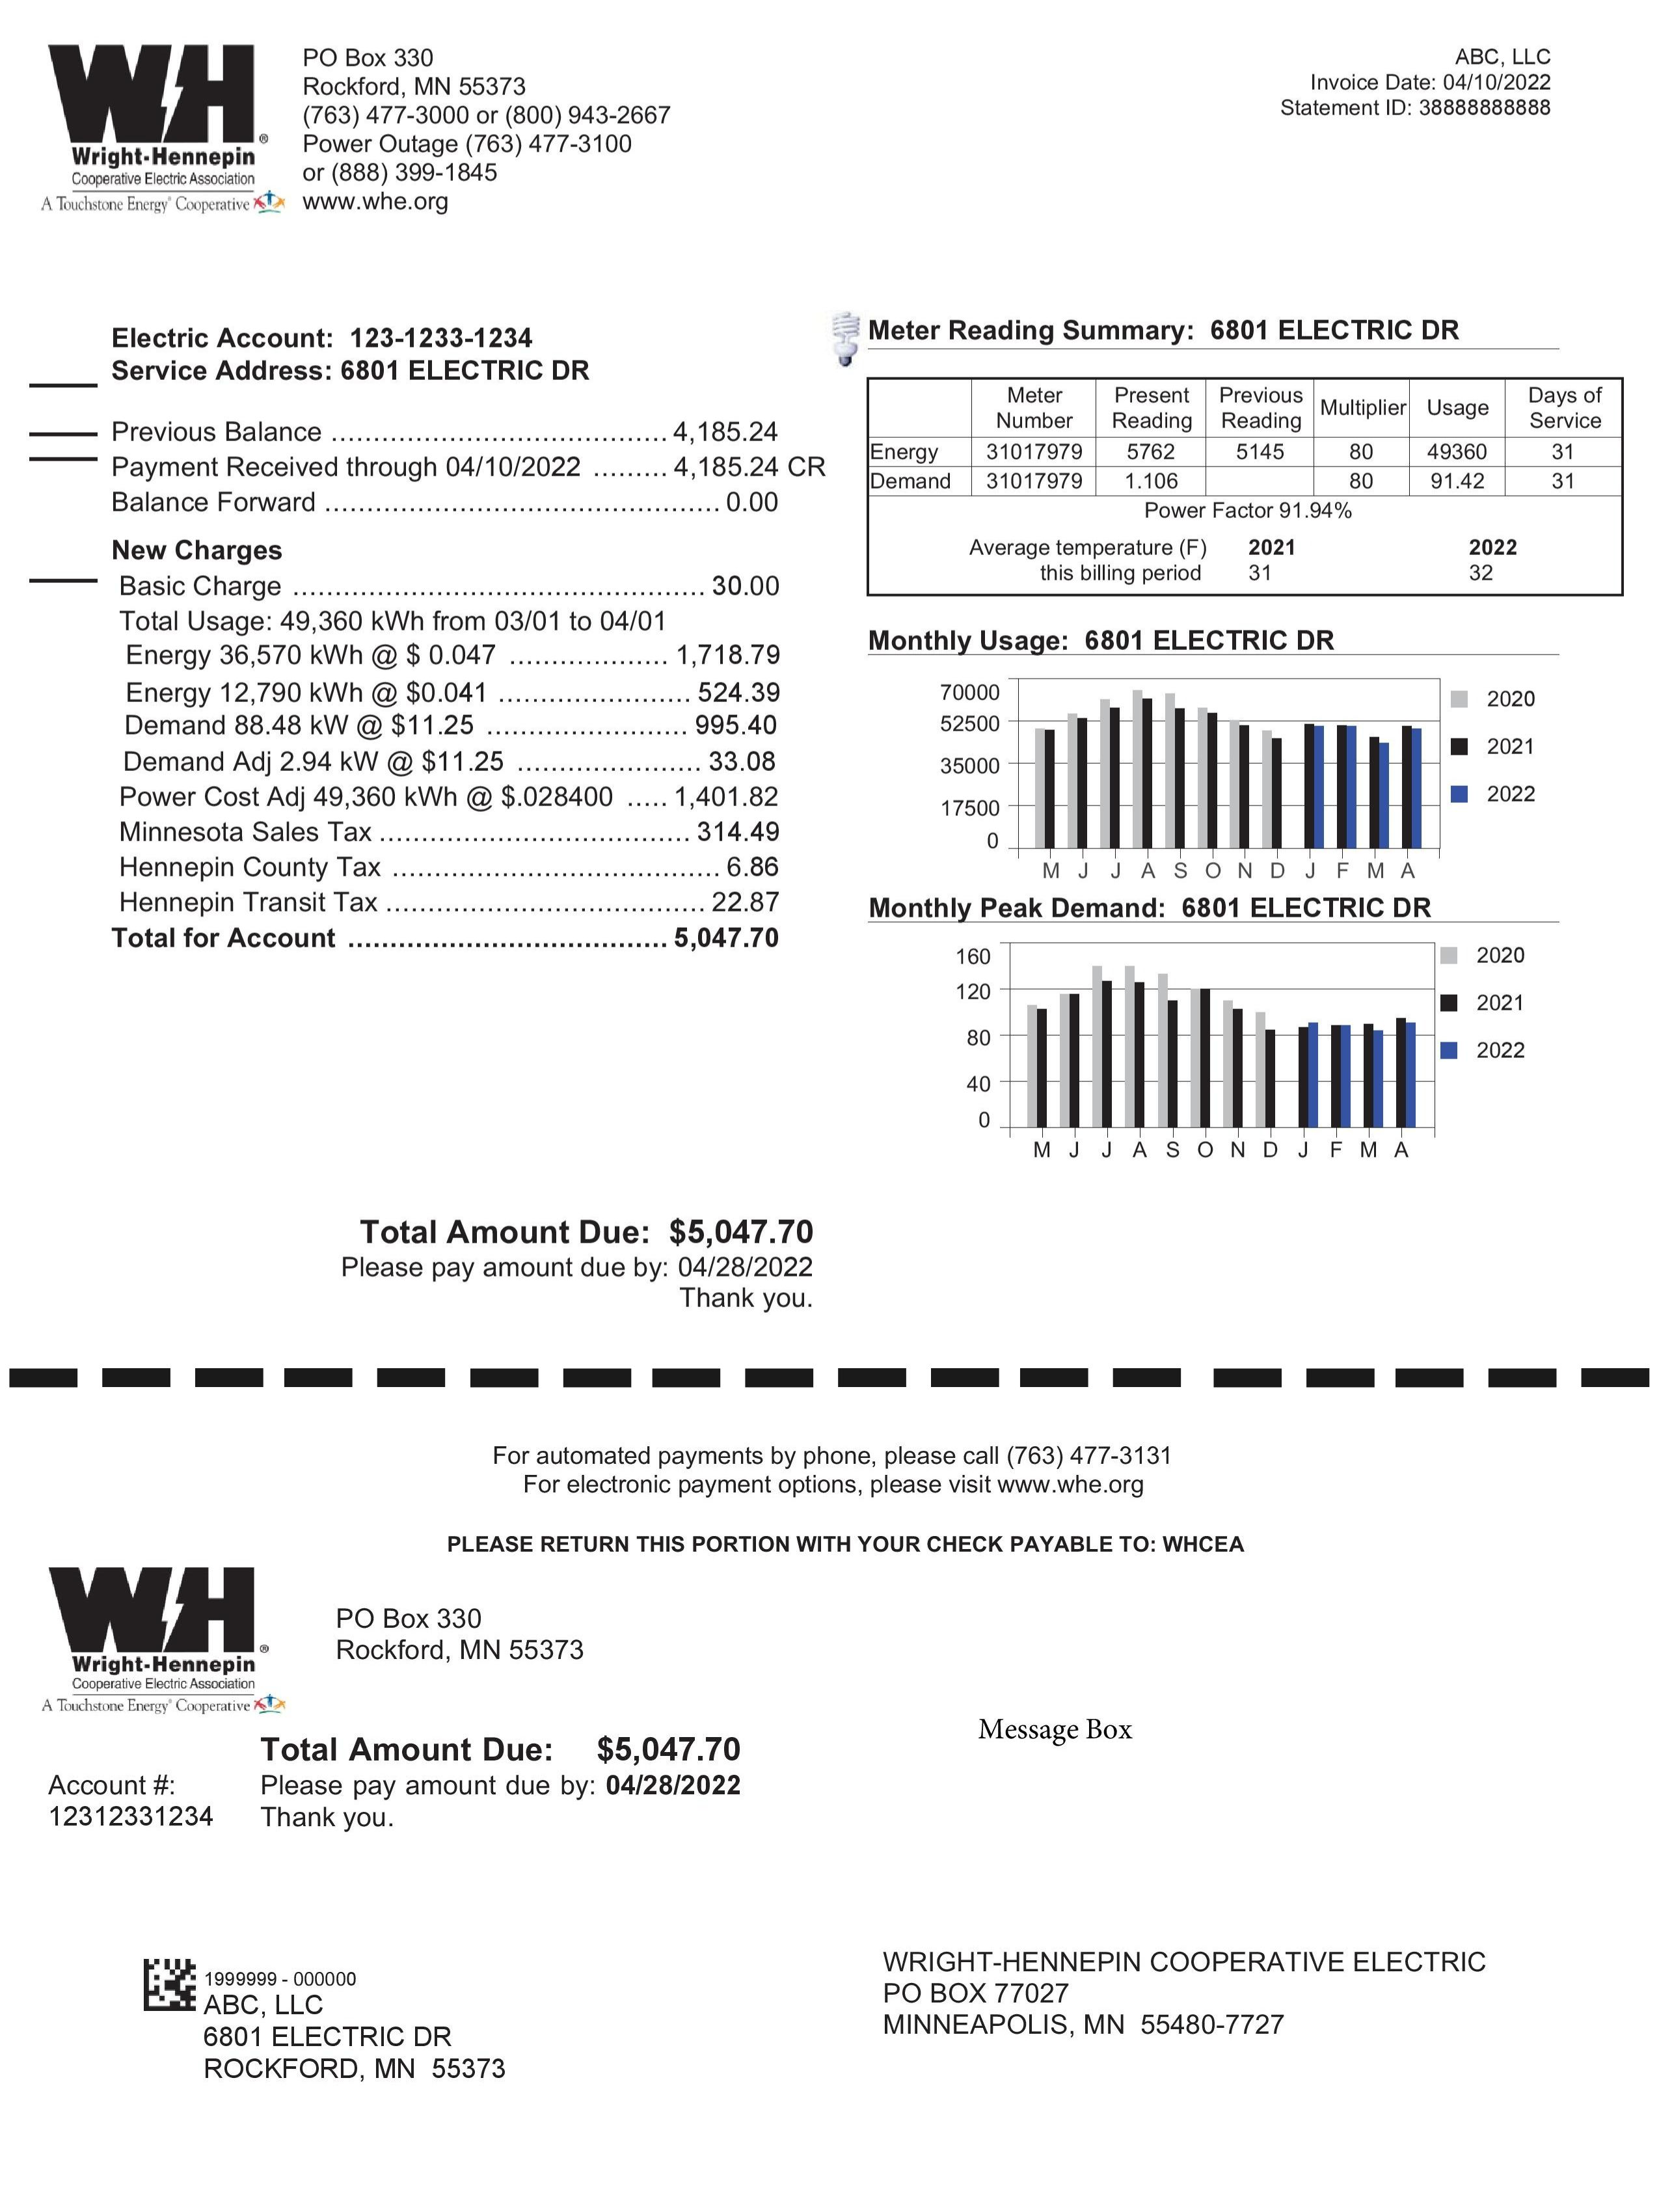 Wright-Hennepin’s commercial electric bill